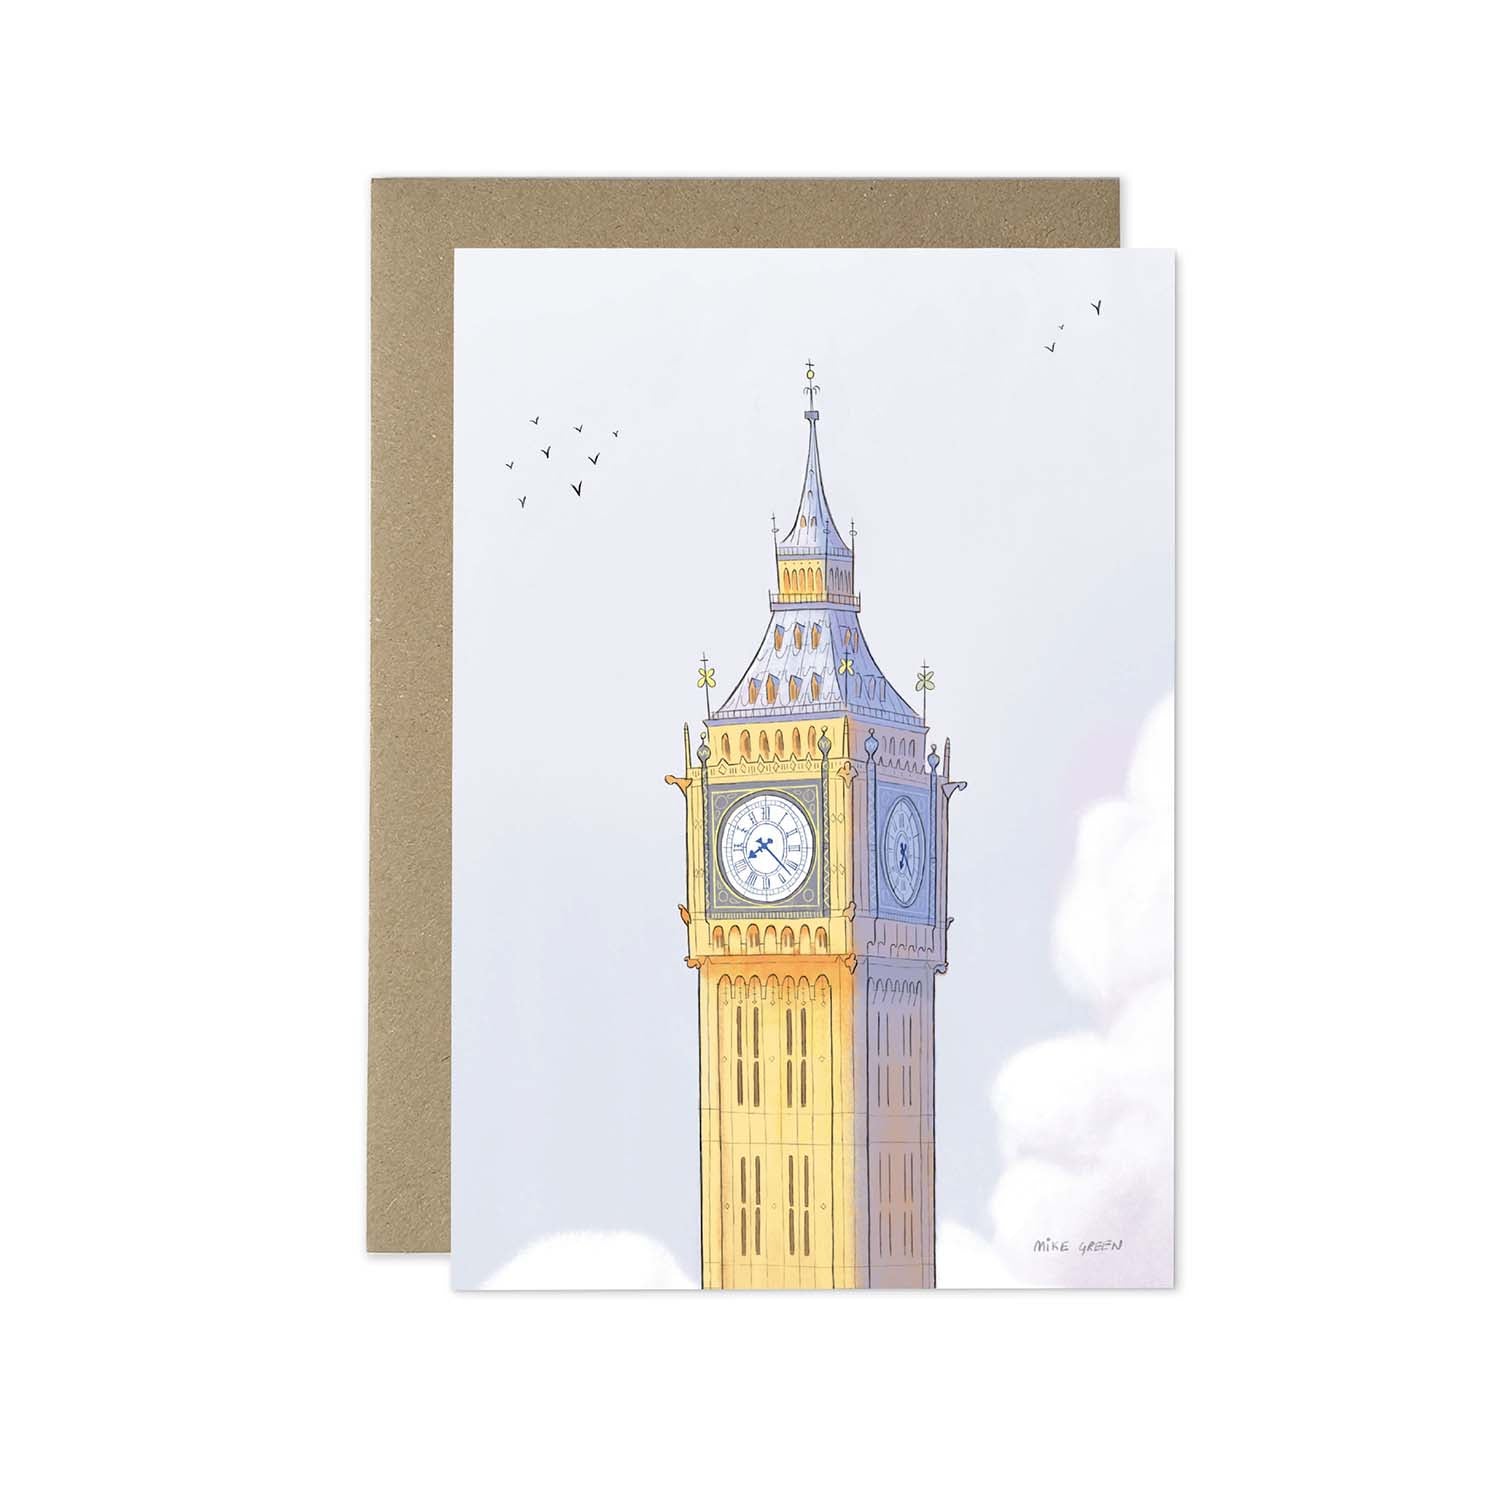 London's Big Ben beautifully illustrated on a greeting card by mike green illustration.